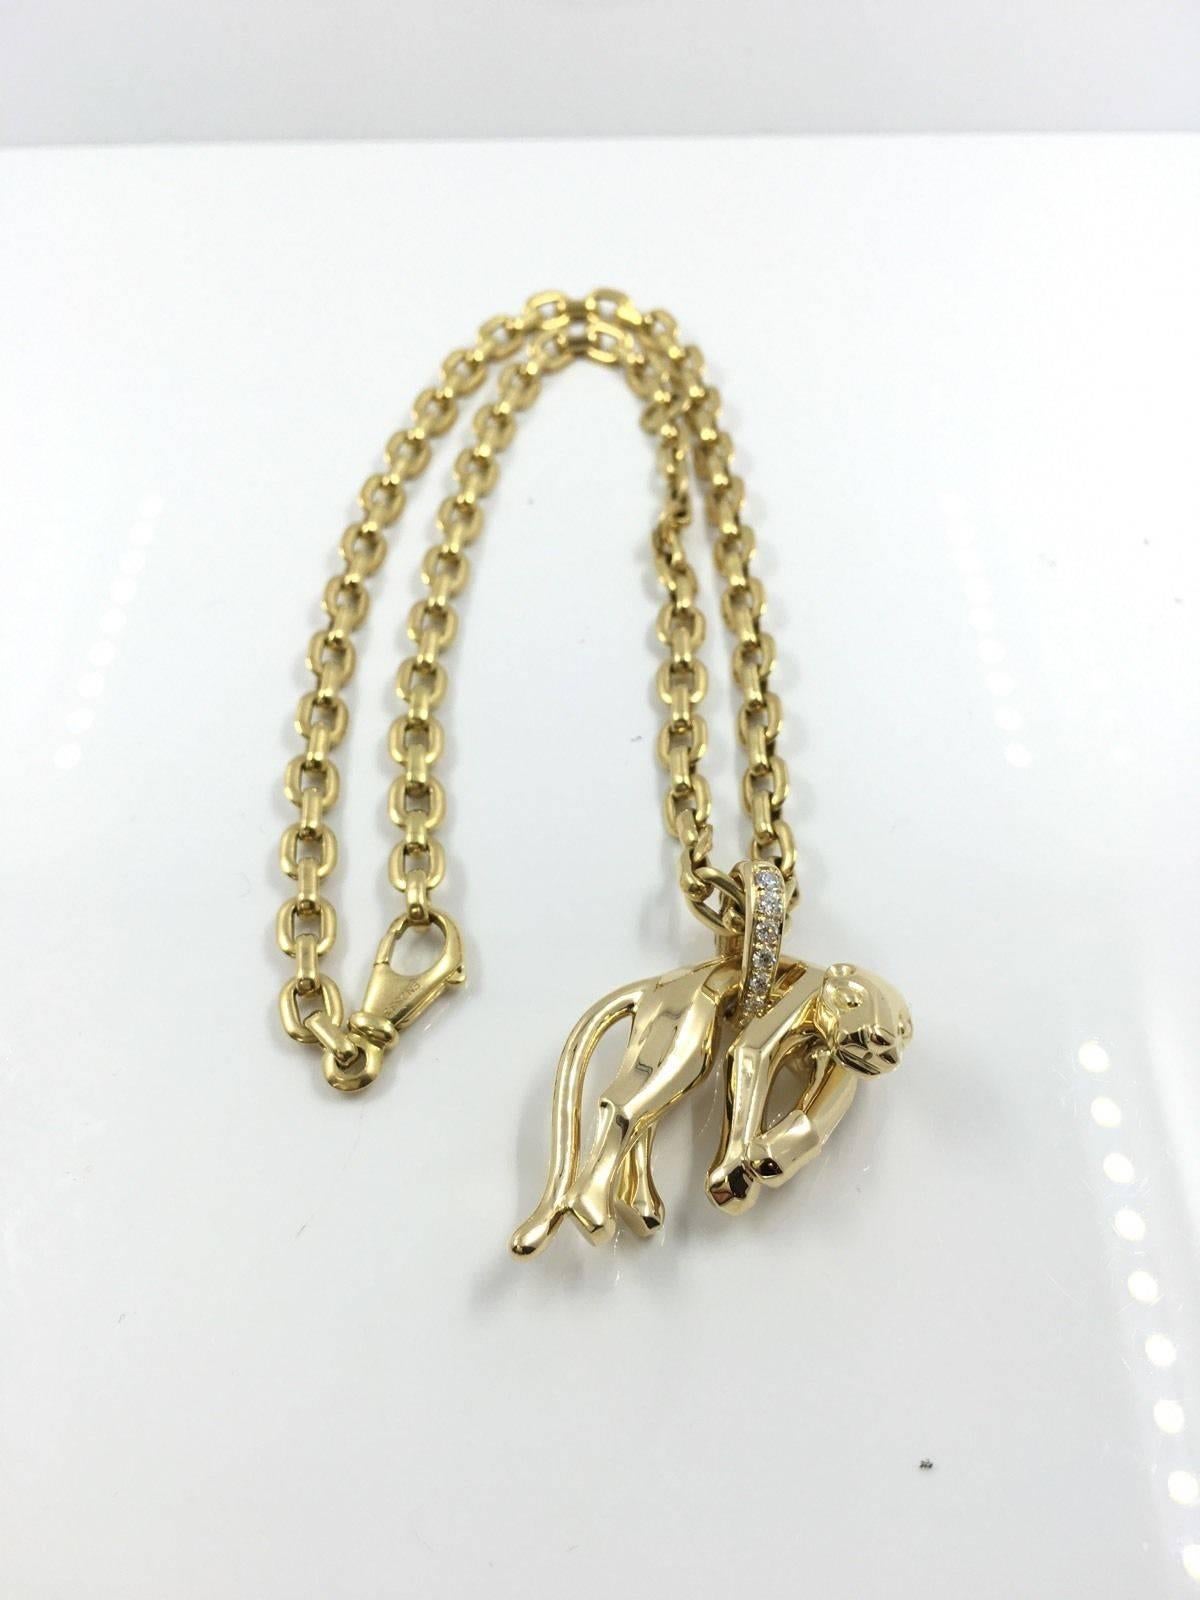 Cut: Excellent
Clarity: vvs
Total Carat Weight: 0.50
Style: Pendant
Metal: 18k
Diamond Color: F

This piece from Cartier's famed Panthere collection is sure to turn heads, and garner much attention. The pendant is made of 18K yellow gold with